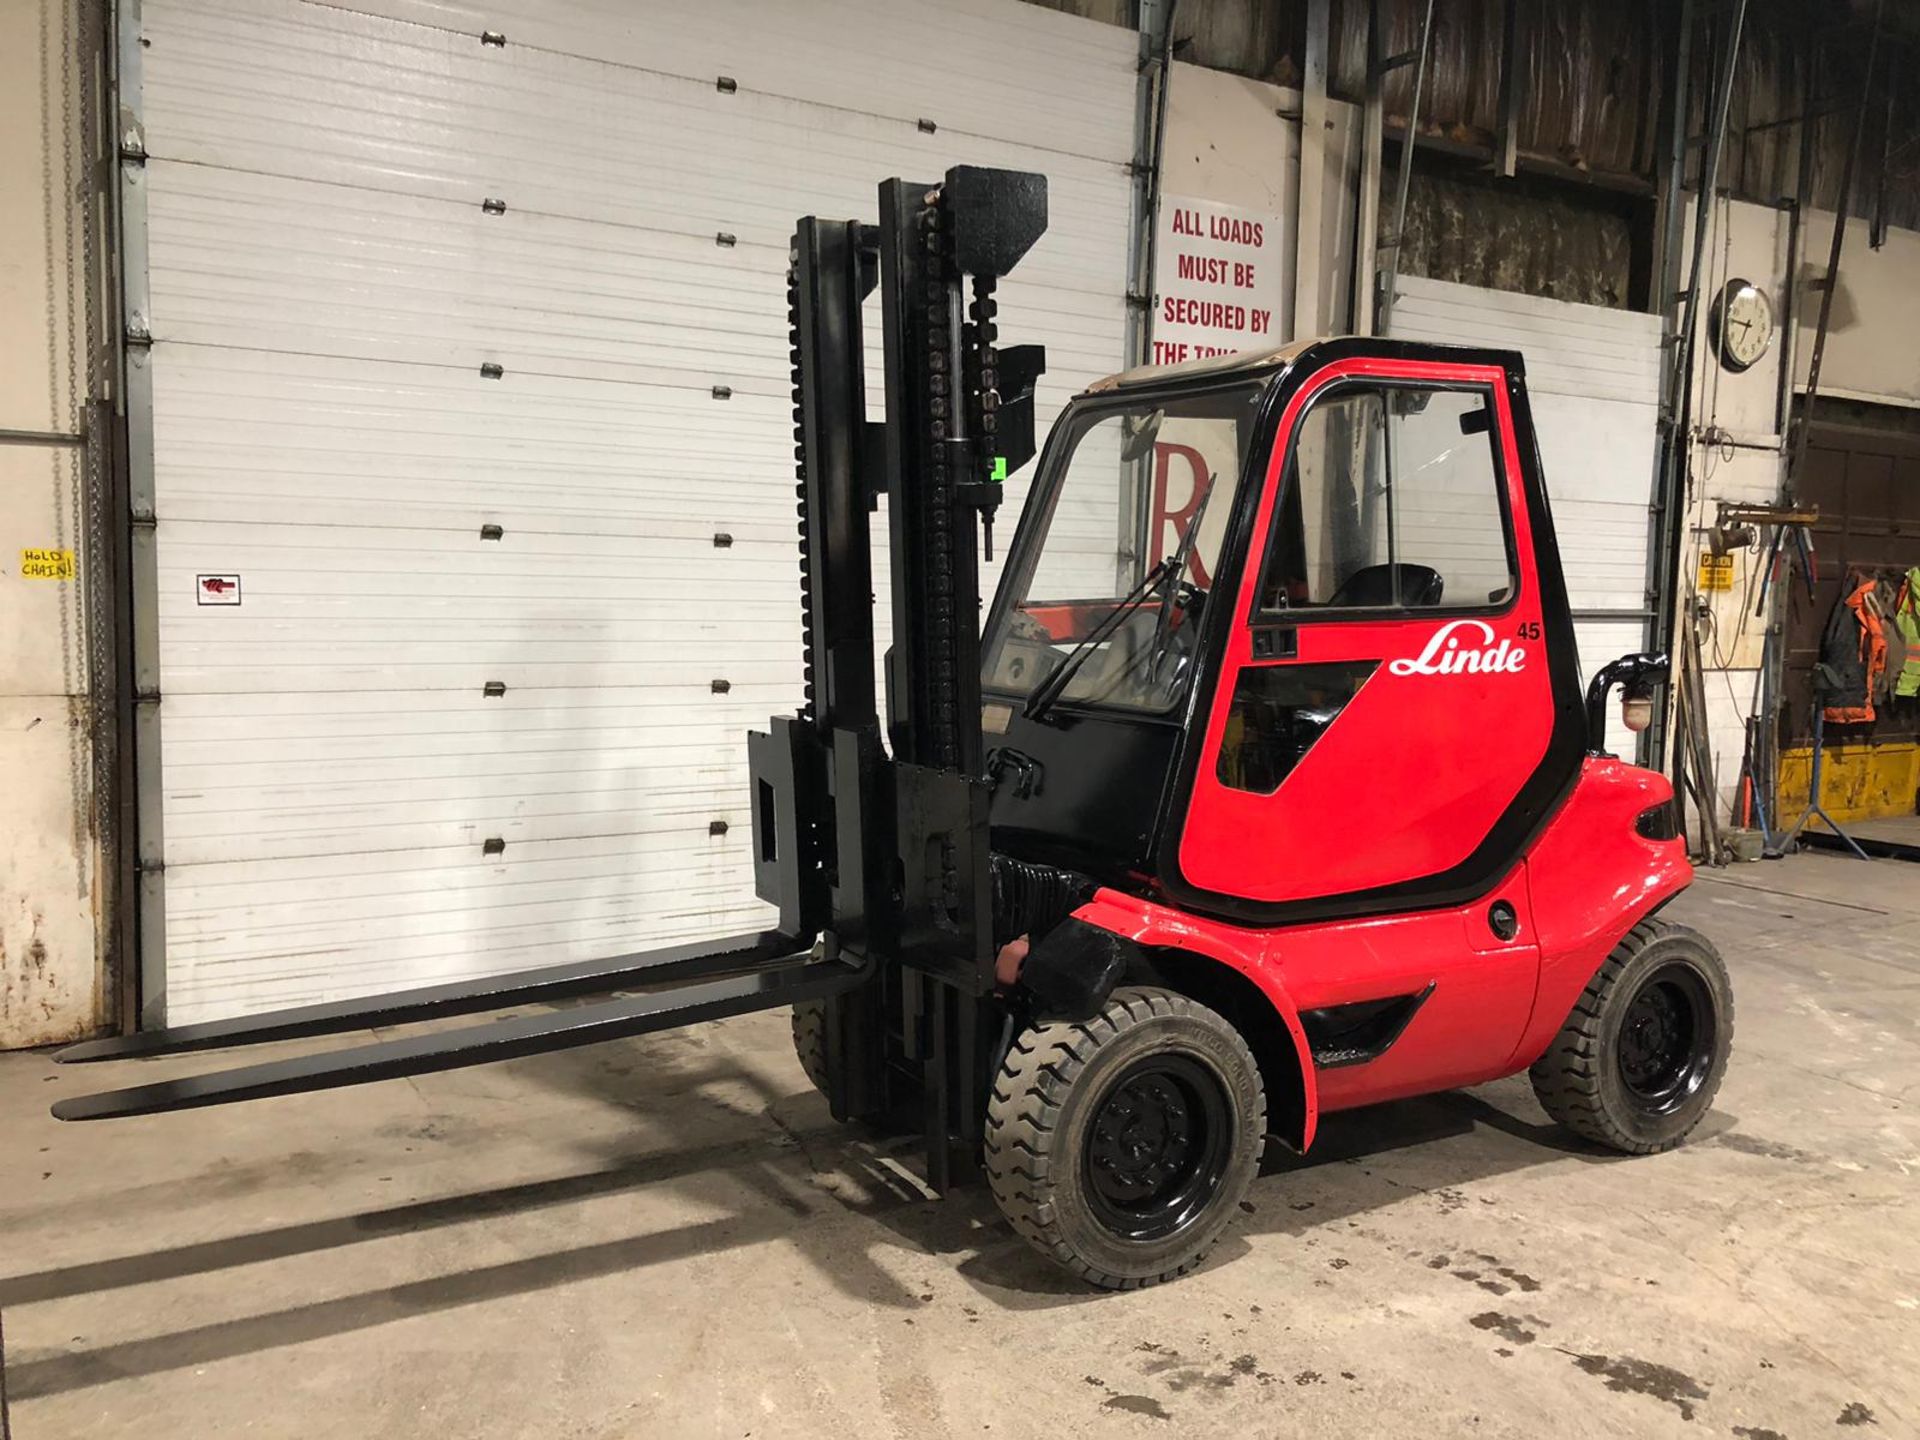 NICE Linde H40D - 9,000lbs Capacity OUTDOOR Forklift Diesel with 70" Forks & sideshift - FREE